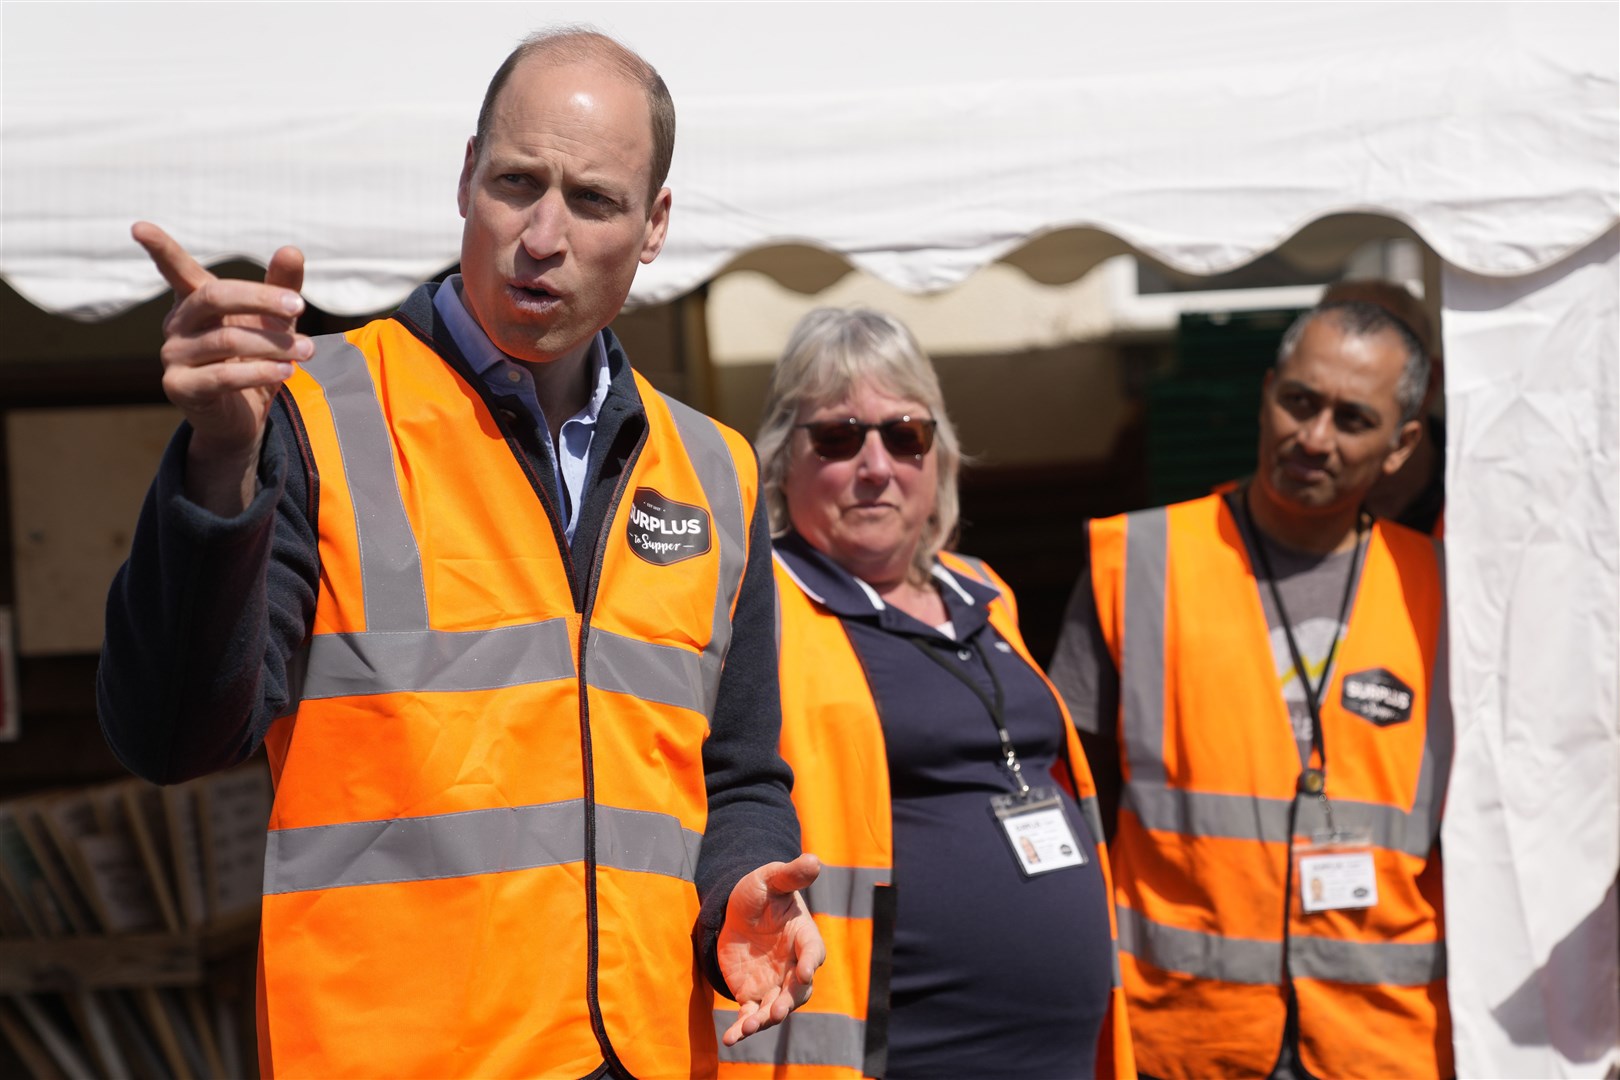 William talks to van drivers during a visit to Surplus to Supper in Surrey (Alastair Grant/PA)